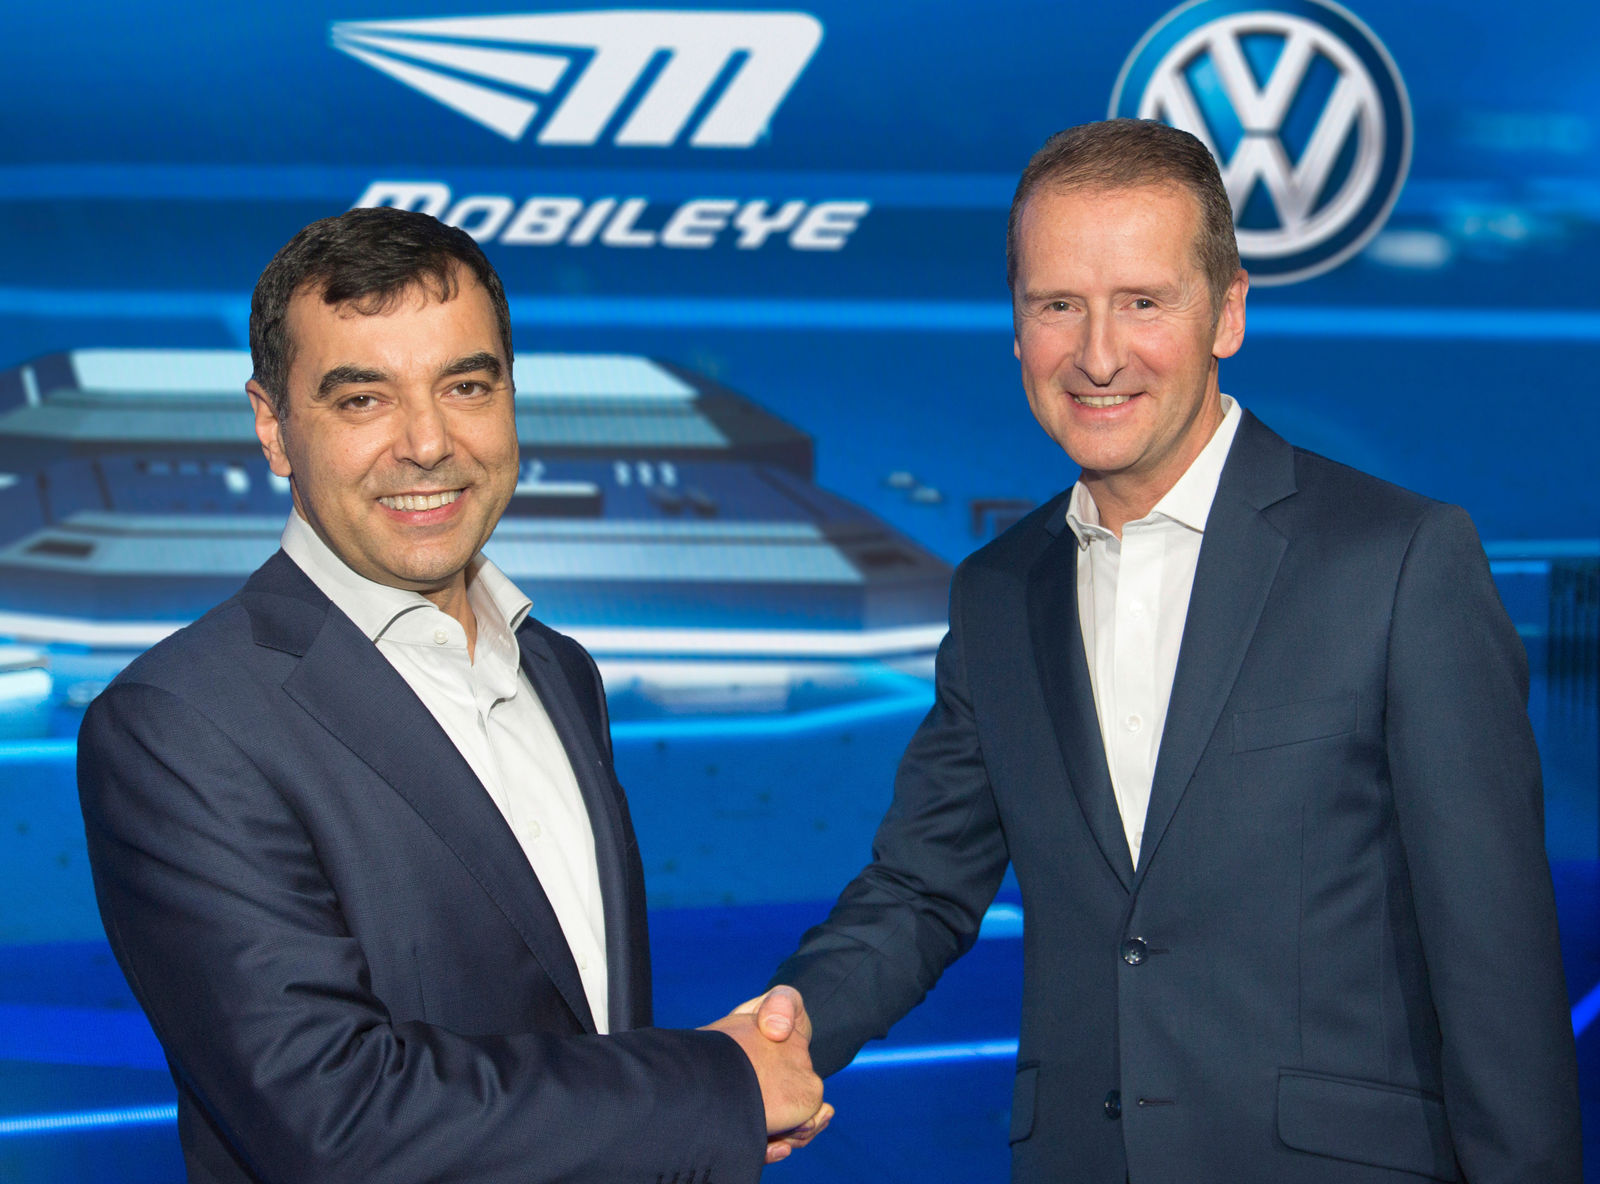 Swarm data paves way for autonomous driving Volkswagen and Mobileye sign agreement